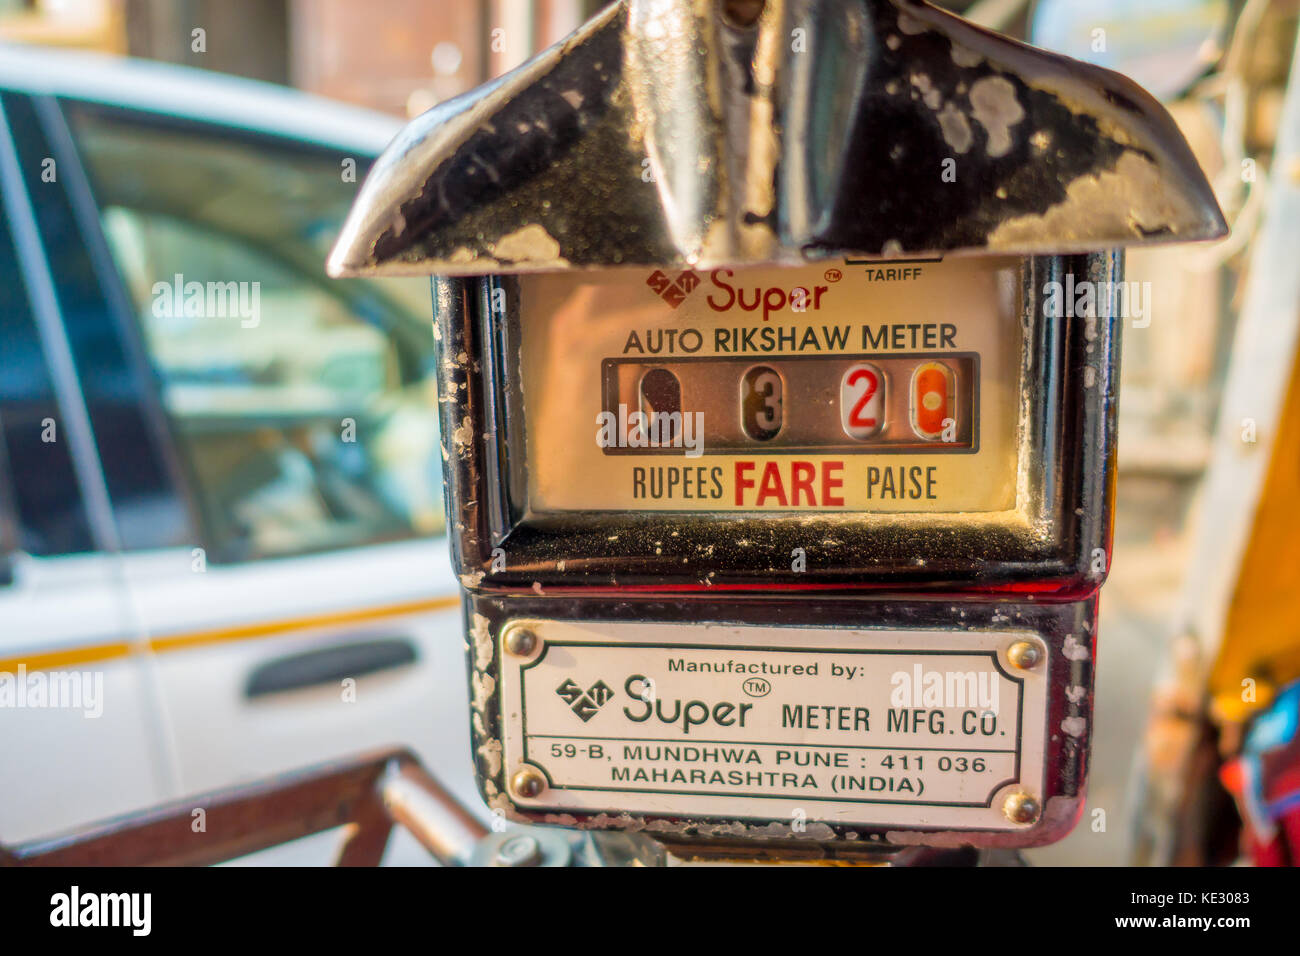 Jaipur, India - September 20, 2017: Old and rusty auto rikshaw not working meter Stock Photo